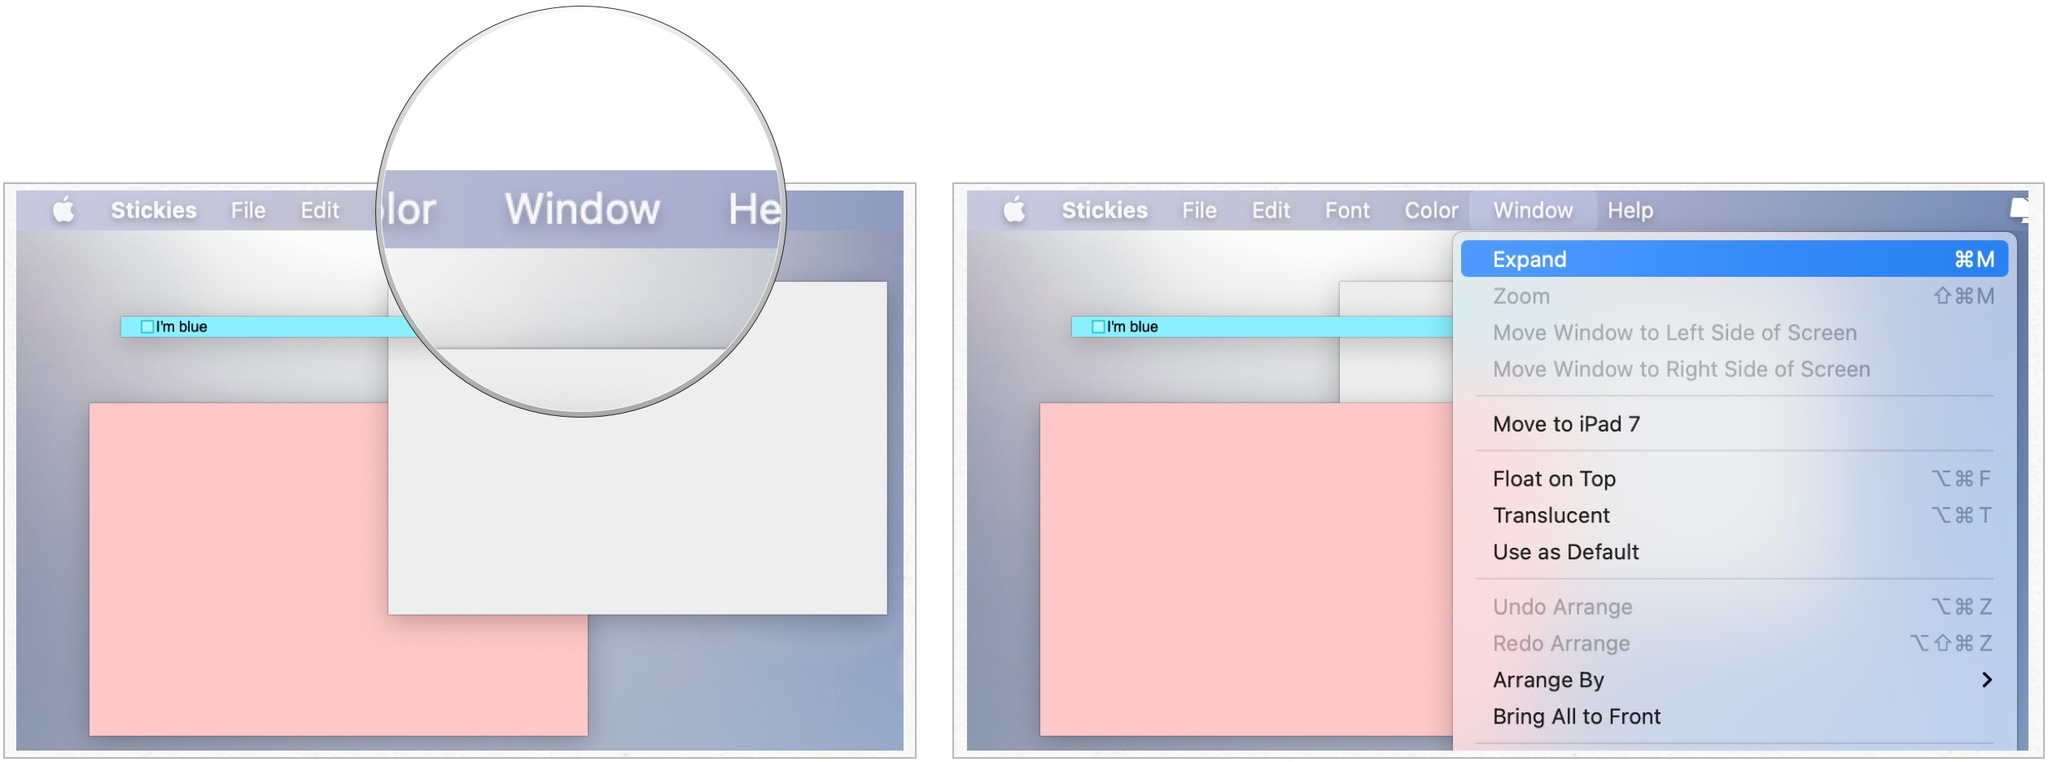 To expand Stickies, launch the Stickies app, then click on a collapsed note. Click Window, then select Expand. 